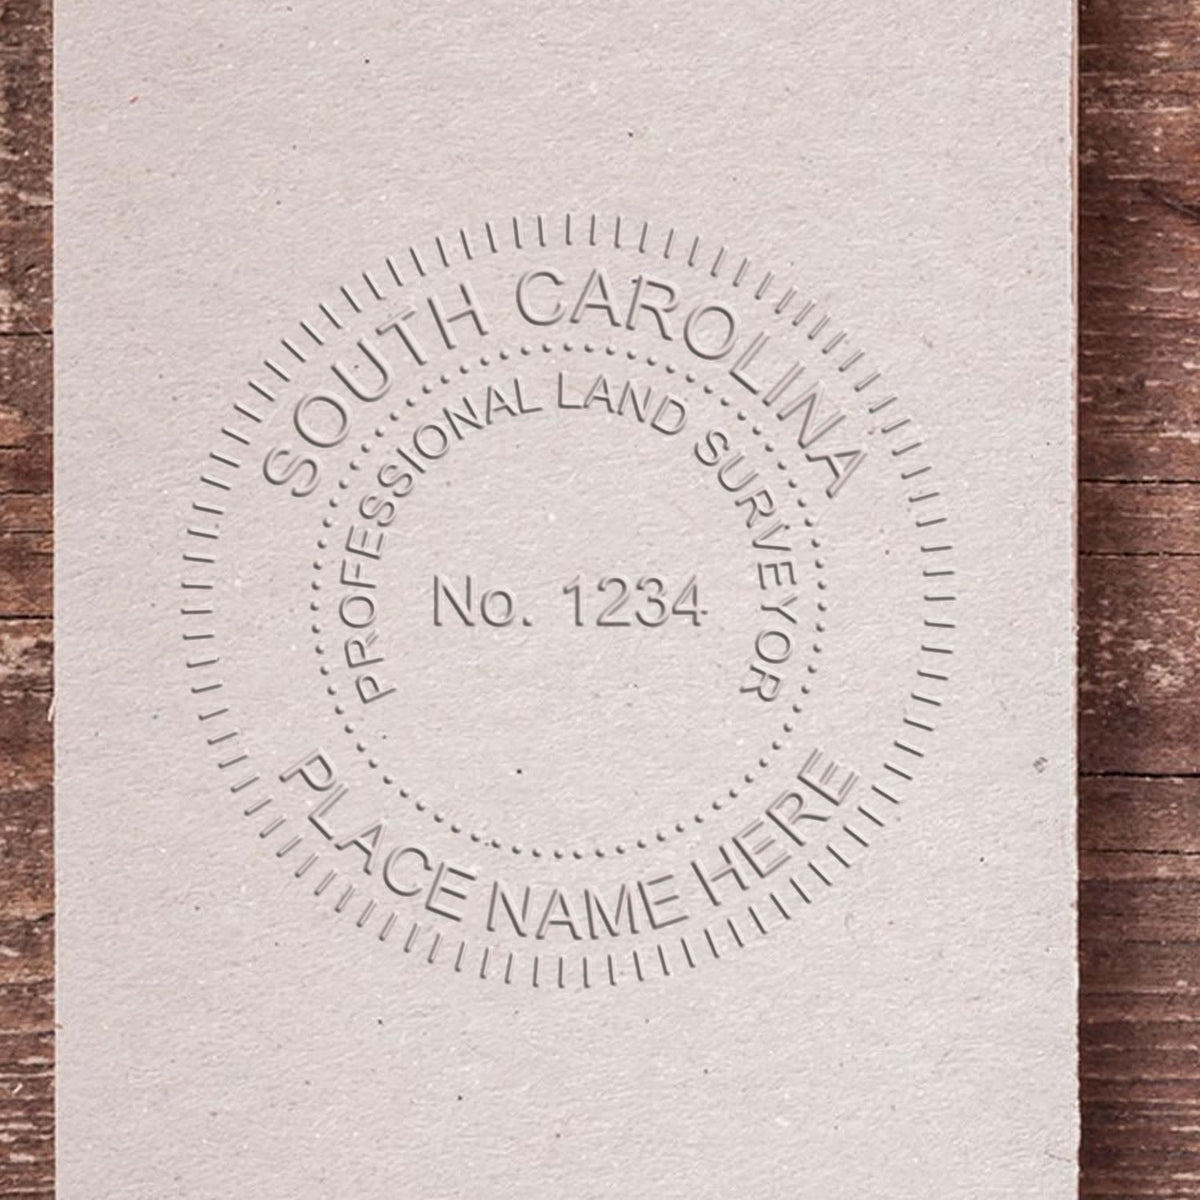 The Gift South Carolina Land Surveyor Seal stamp impression comes to life with a crisp, detailed image stamped on paper - showcasing true professional quality.